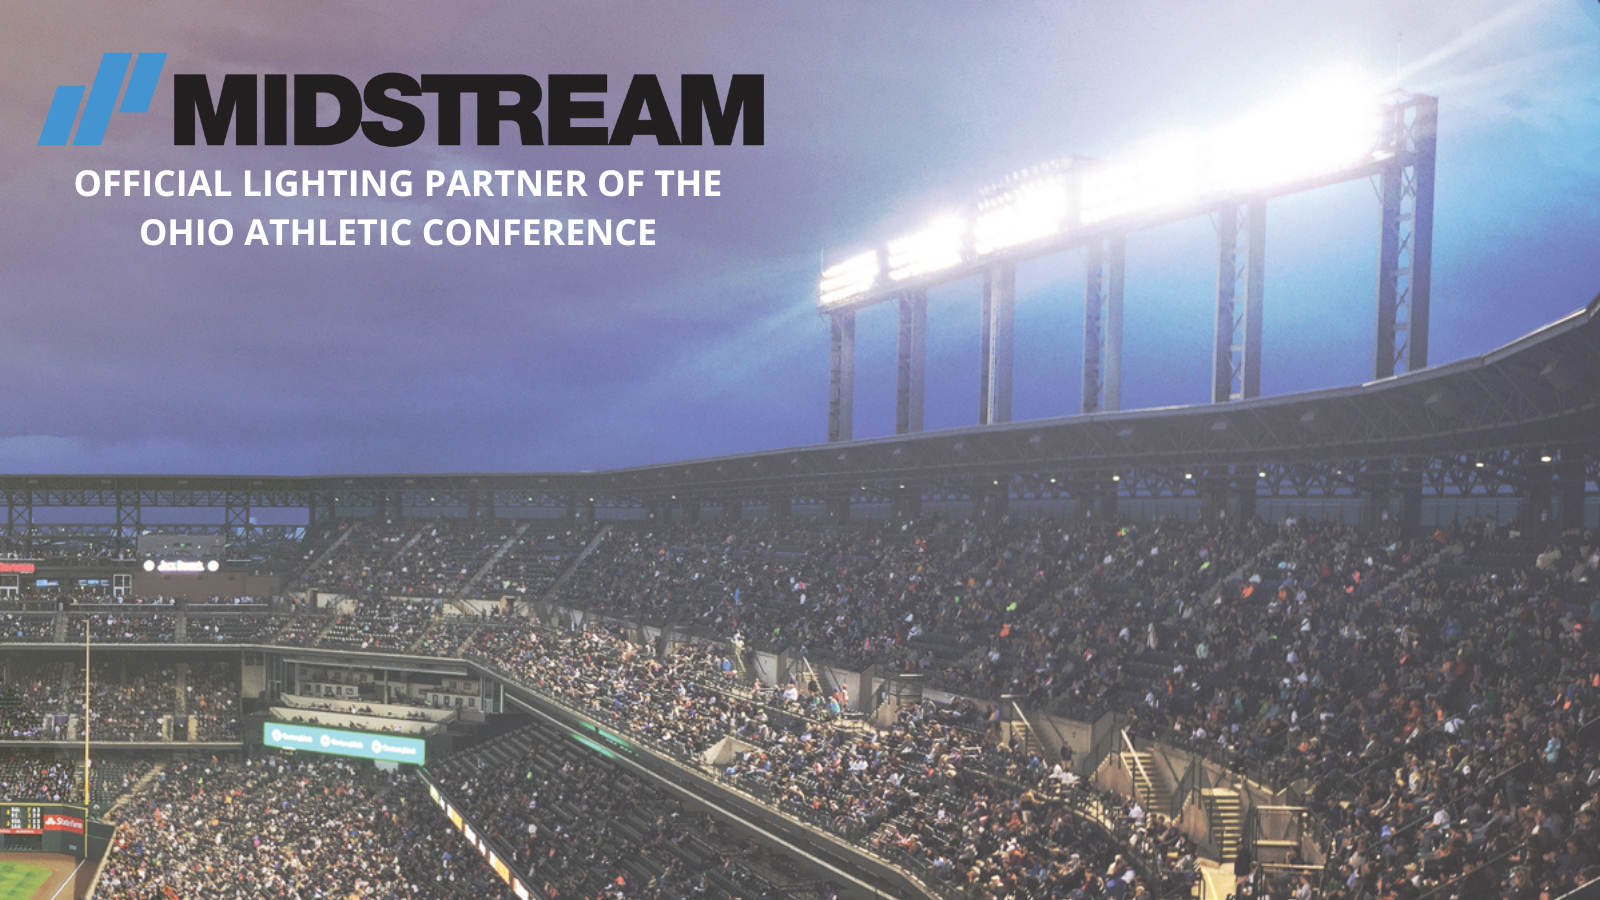 Midstream Lighting Named Official Lighting Partner of the Ohio Athletic Conference